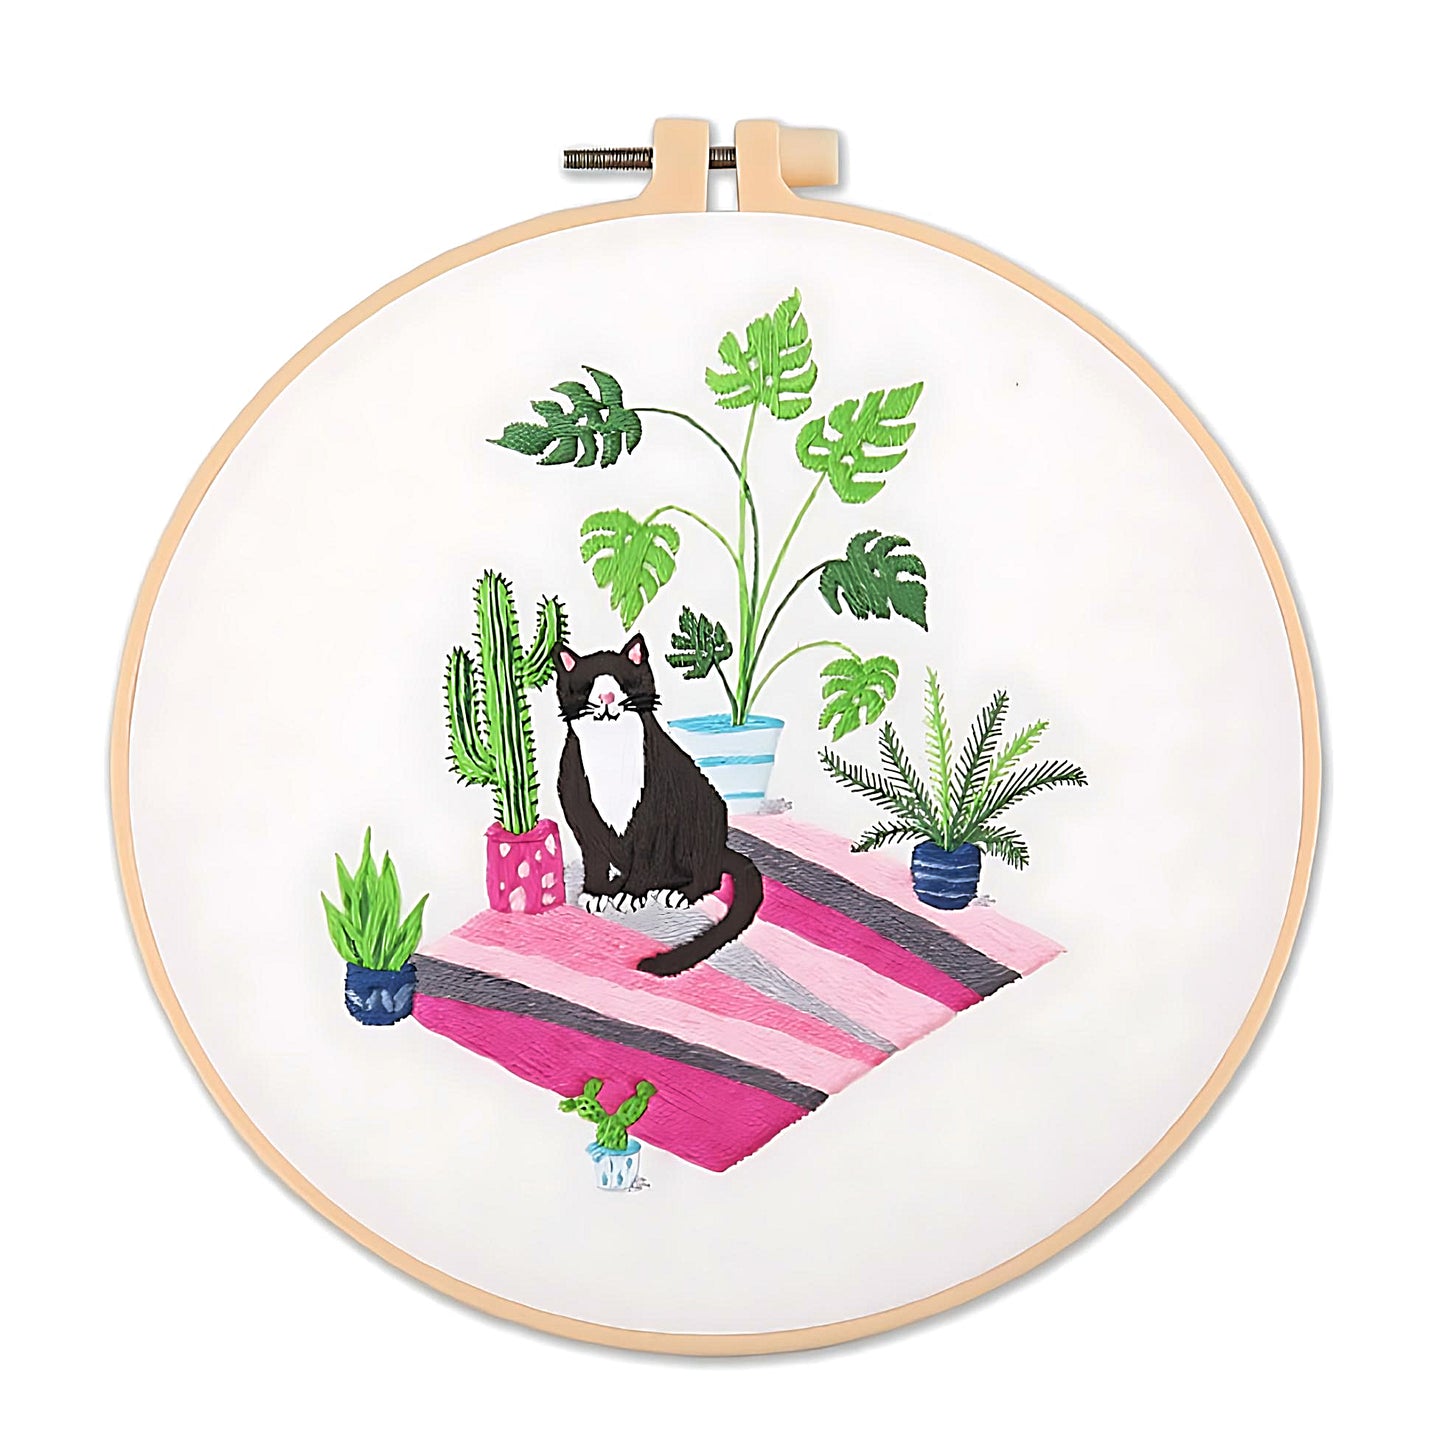 an embroidery of a black cat and plants